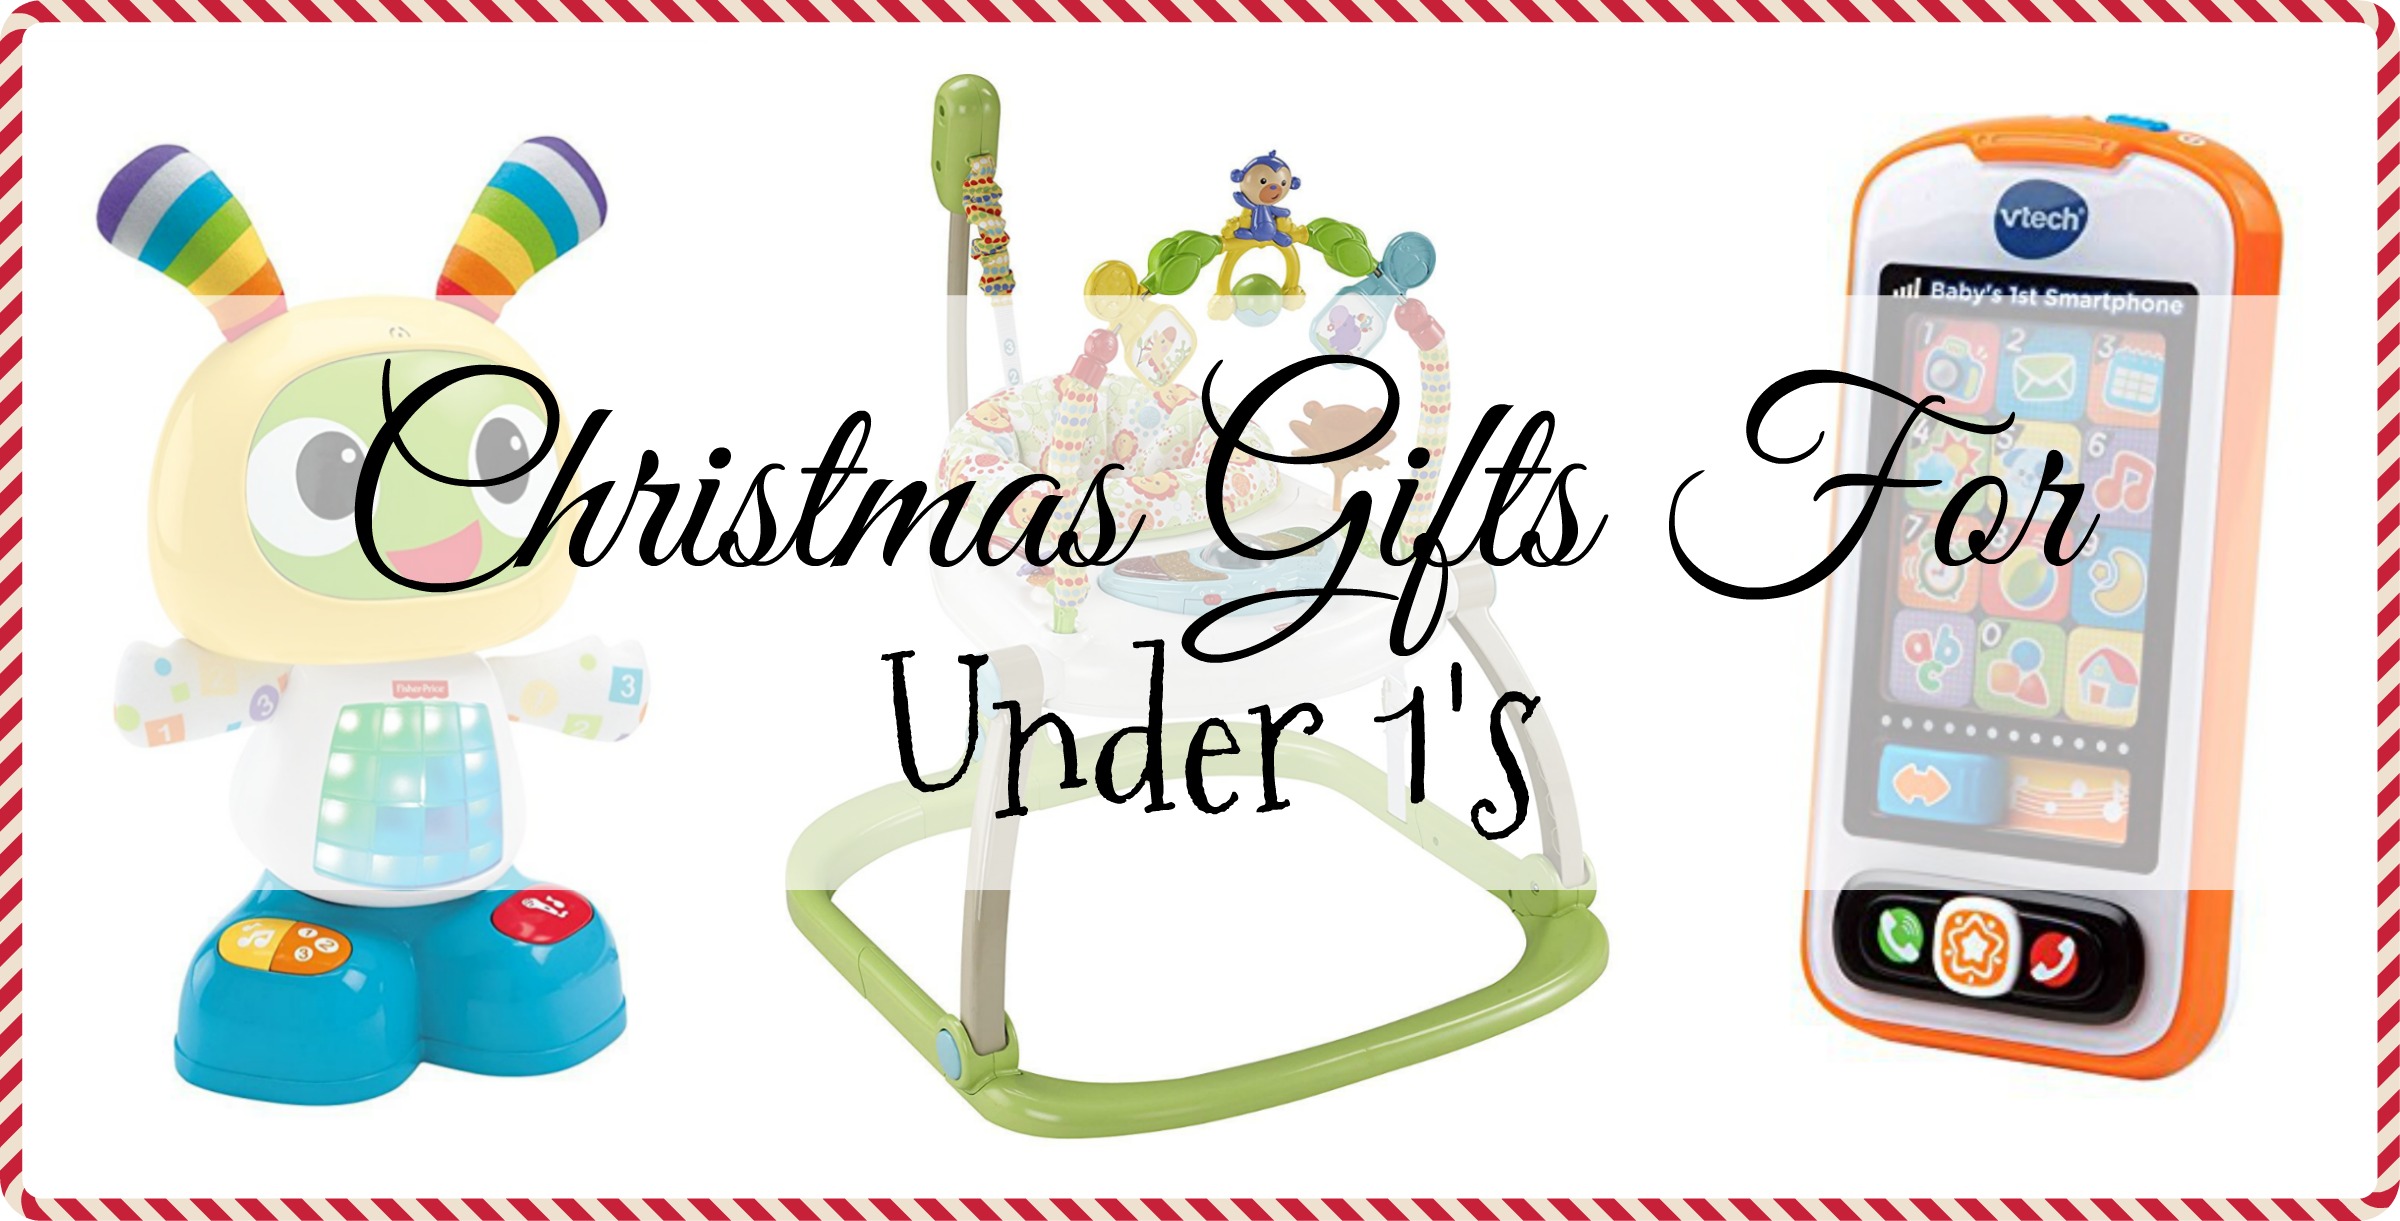 Christmas gifts for under 1s